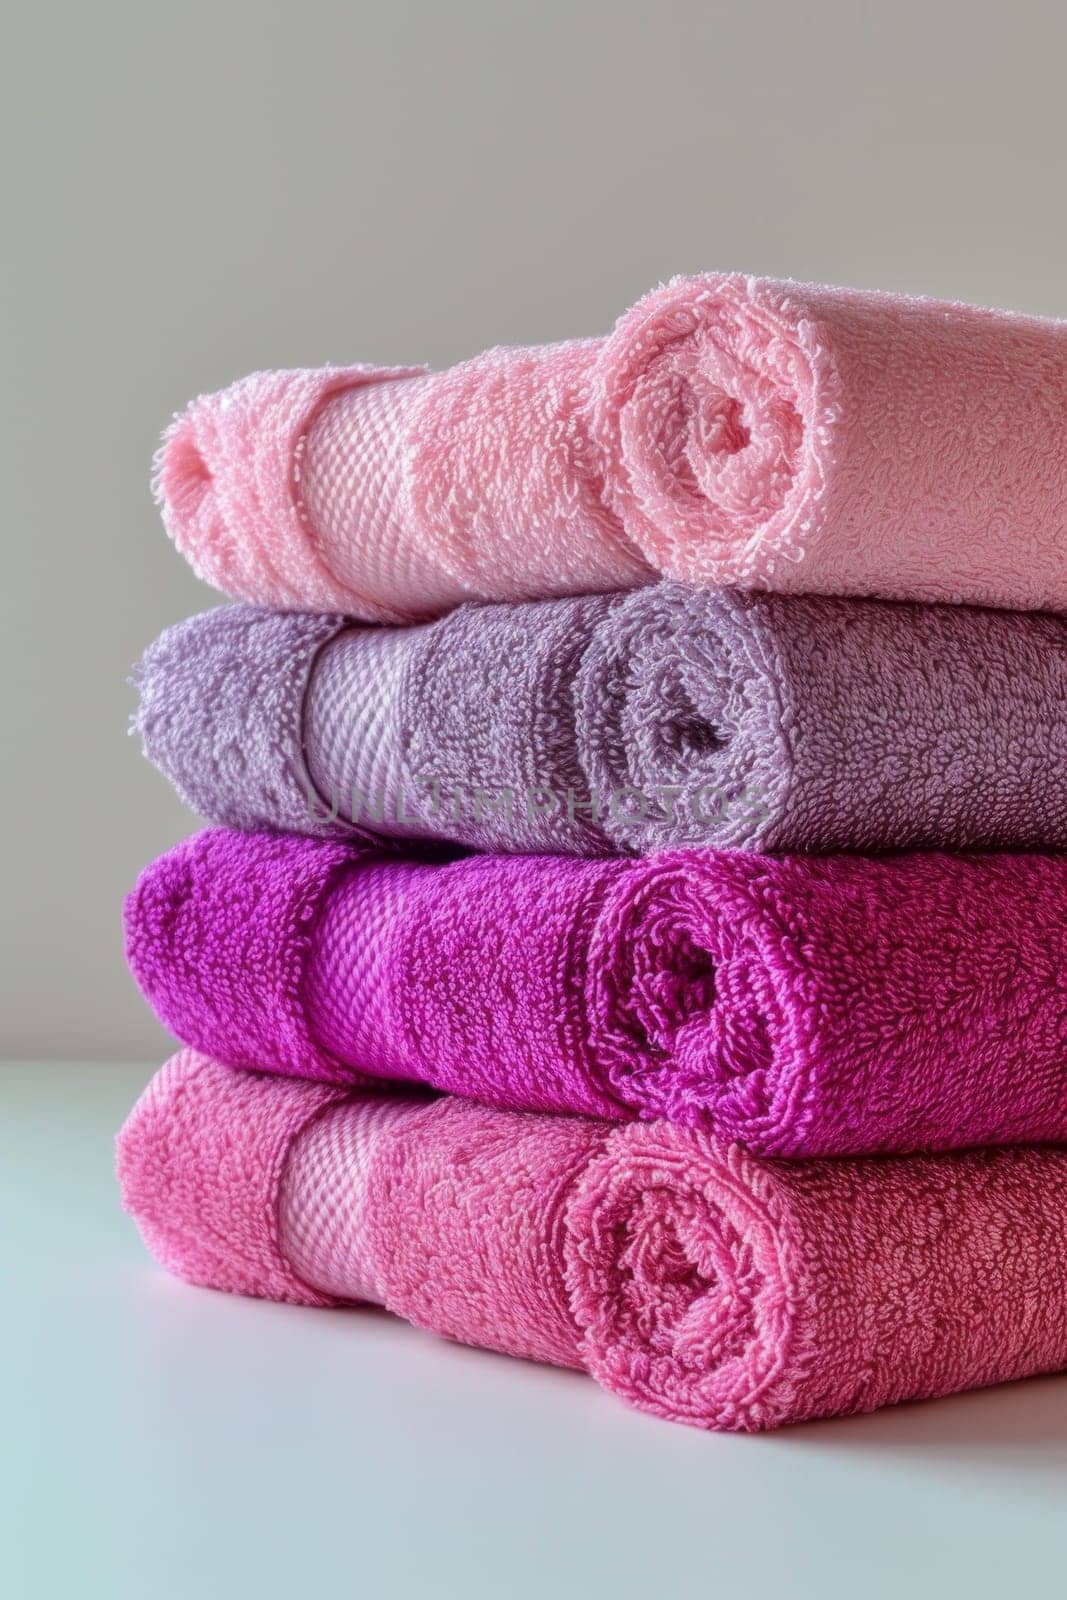 Clean Pink and purple towels.